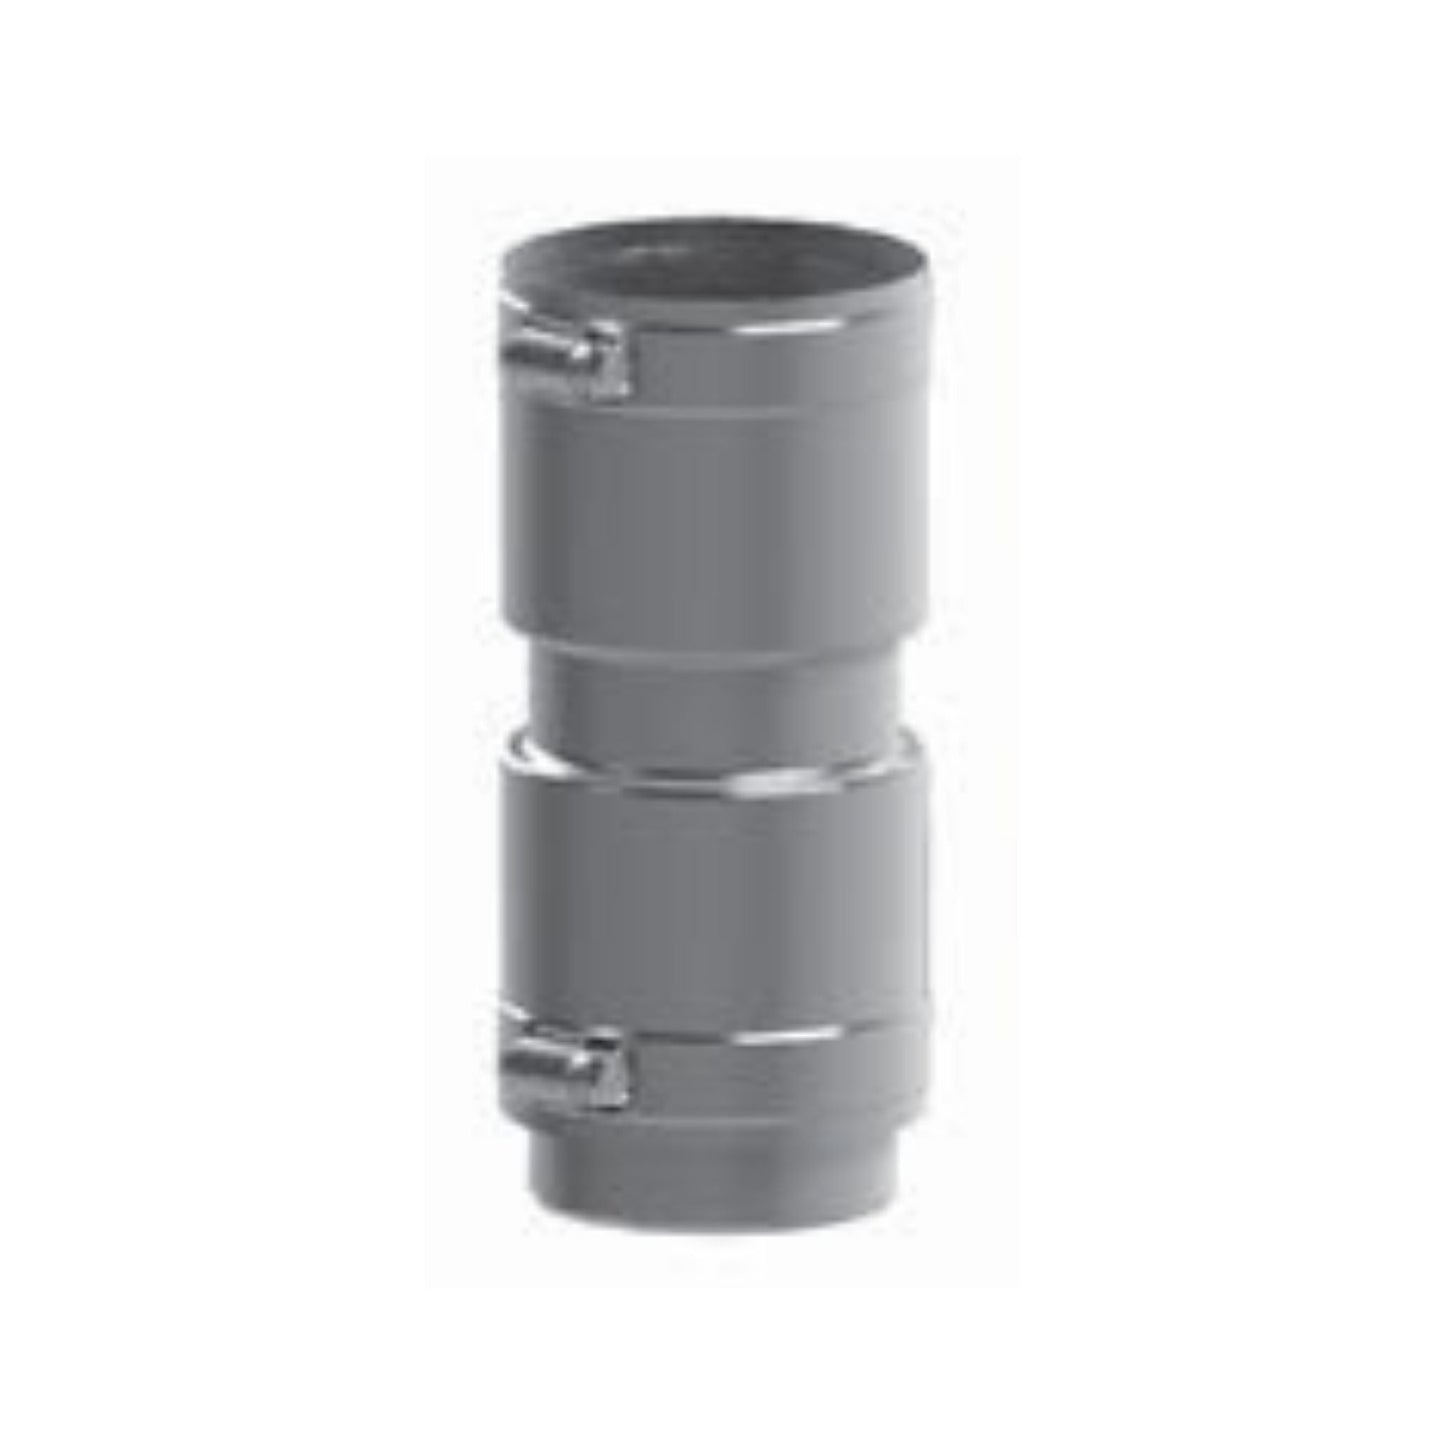 DuraVent FasNSeal Flex 5" 316L Stainless Steel Coupler